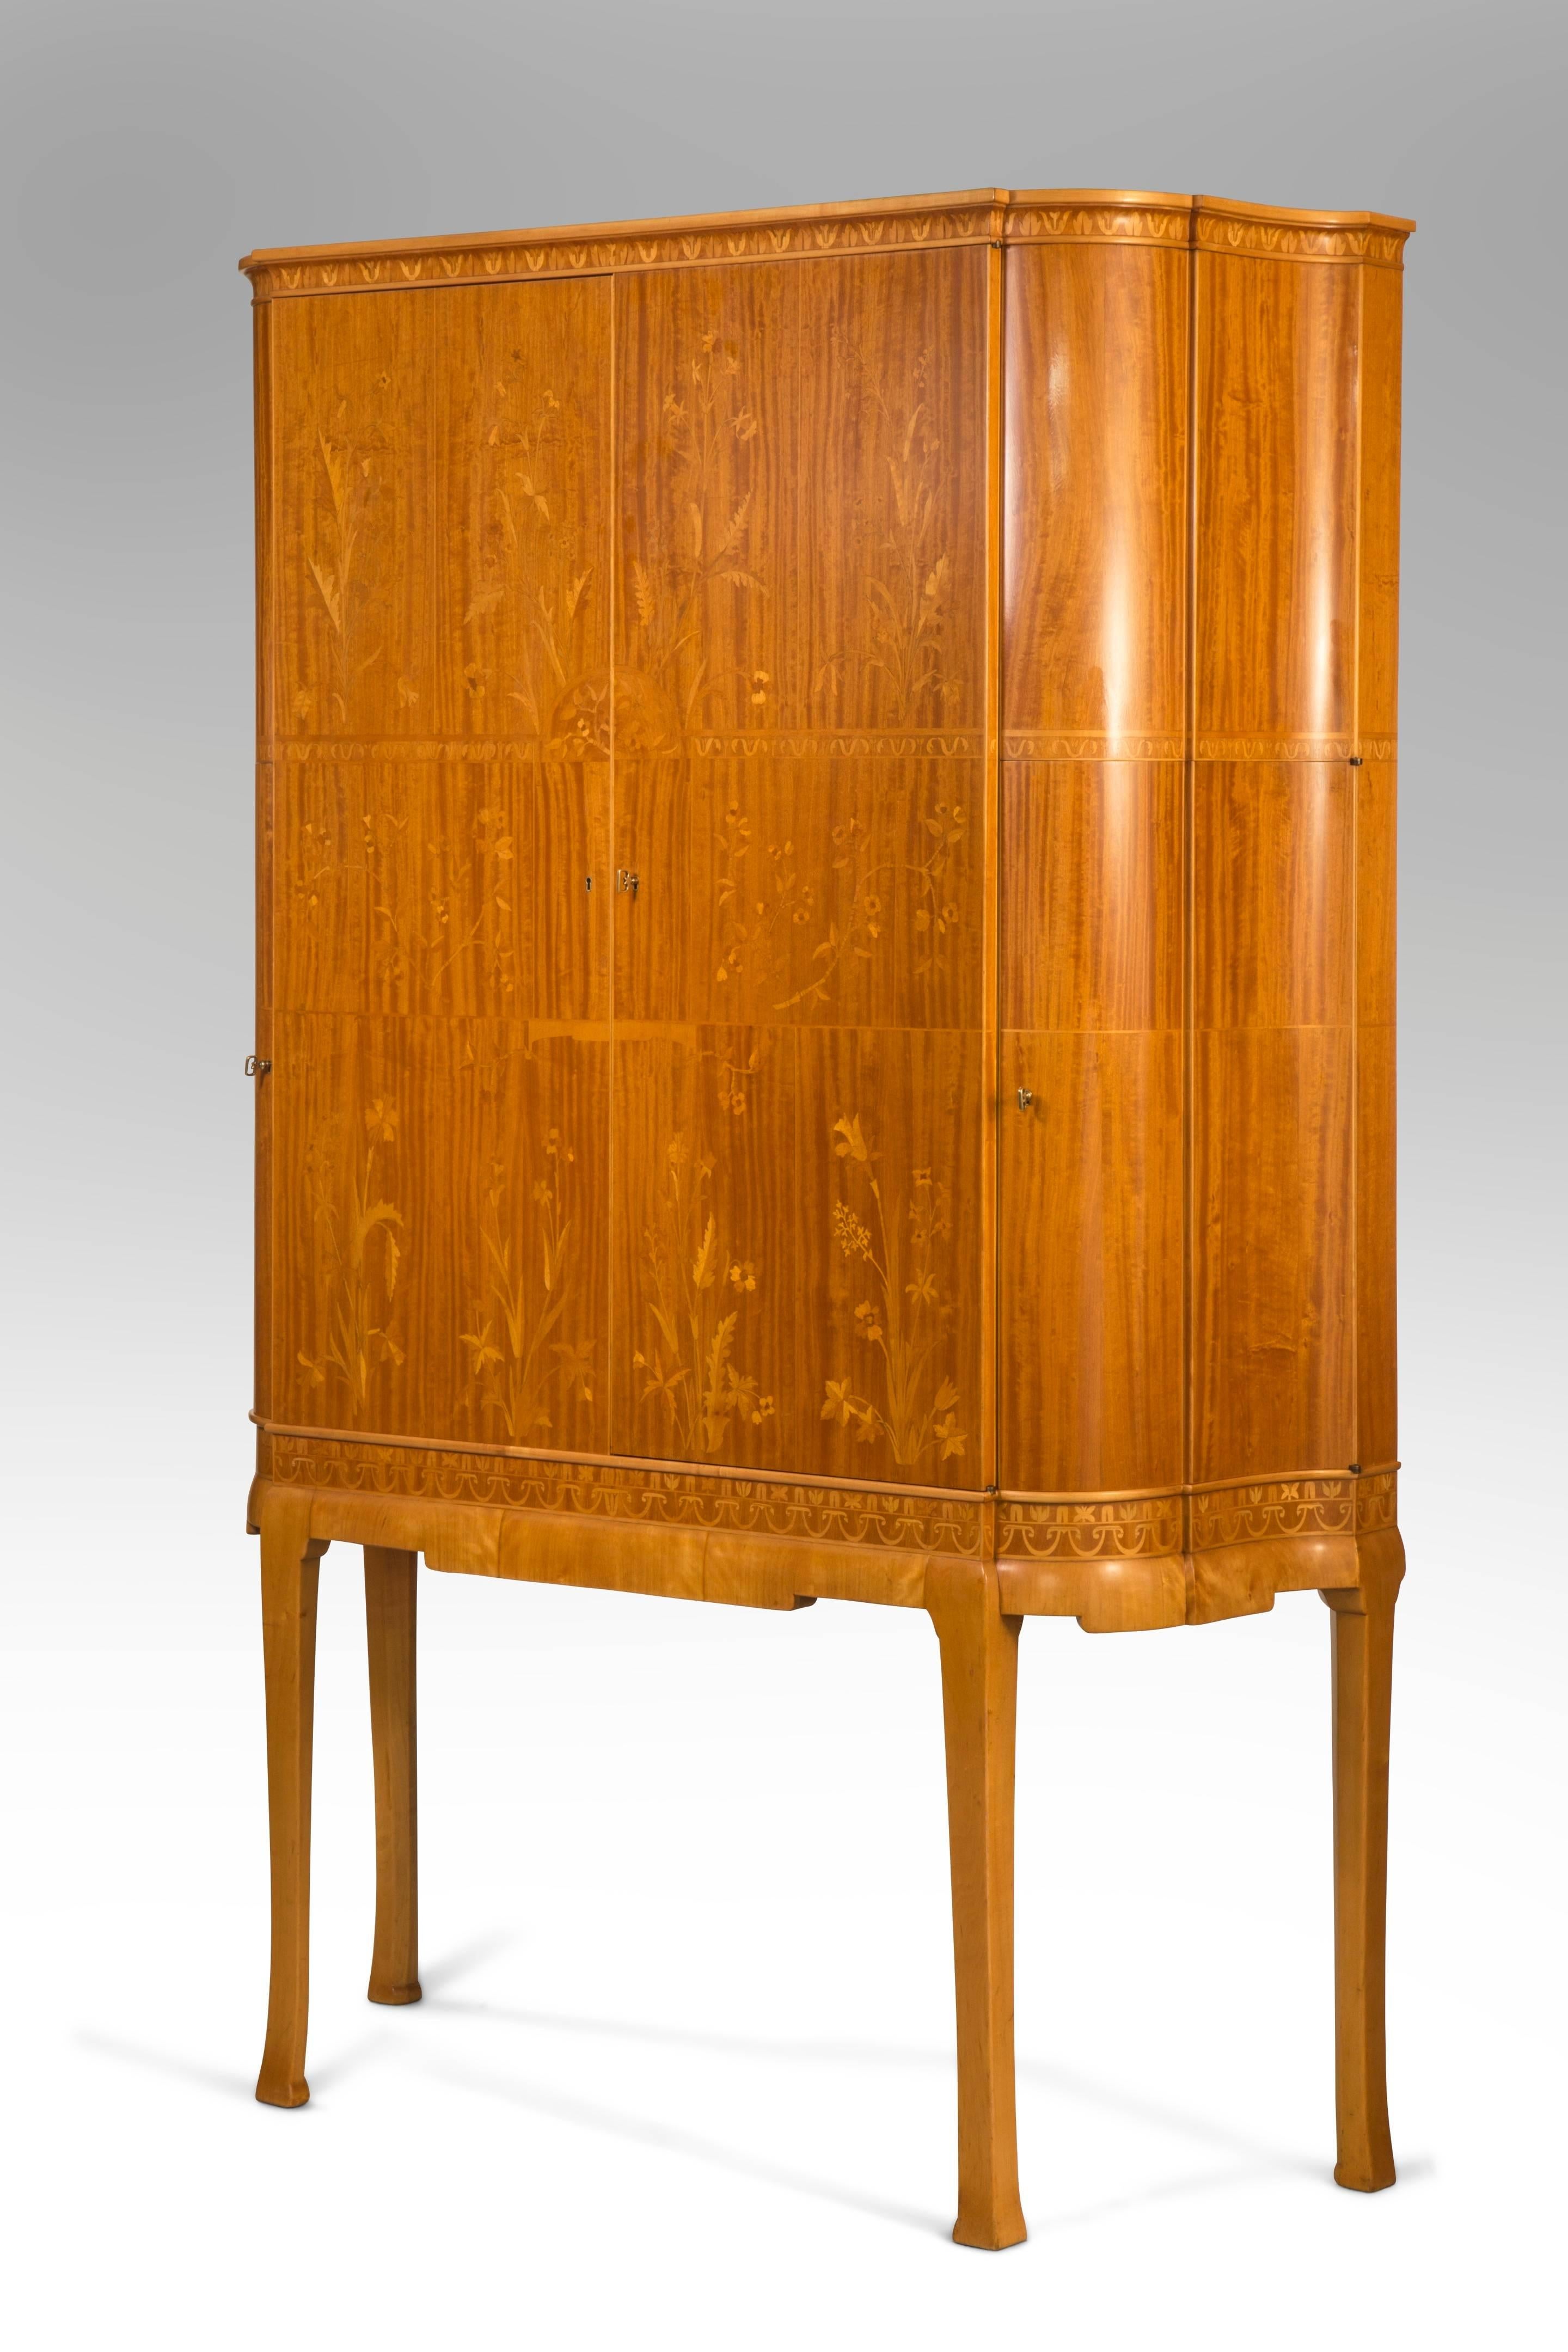 Superb quality, choice materials and very likely a special commission. The molded serpentine top, above a conforming cabinet with two front and two side doors, festooned in individually designed marquetry bouquets, the interior with adjustable